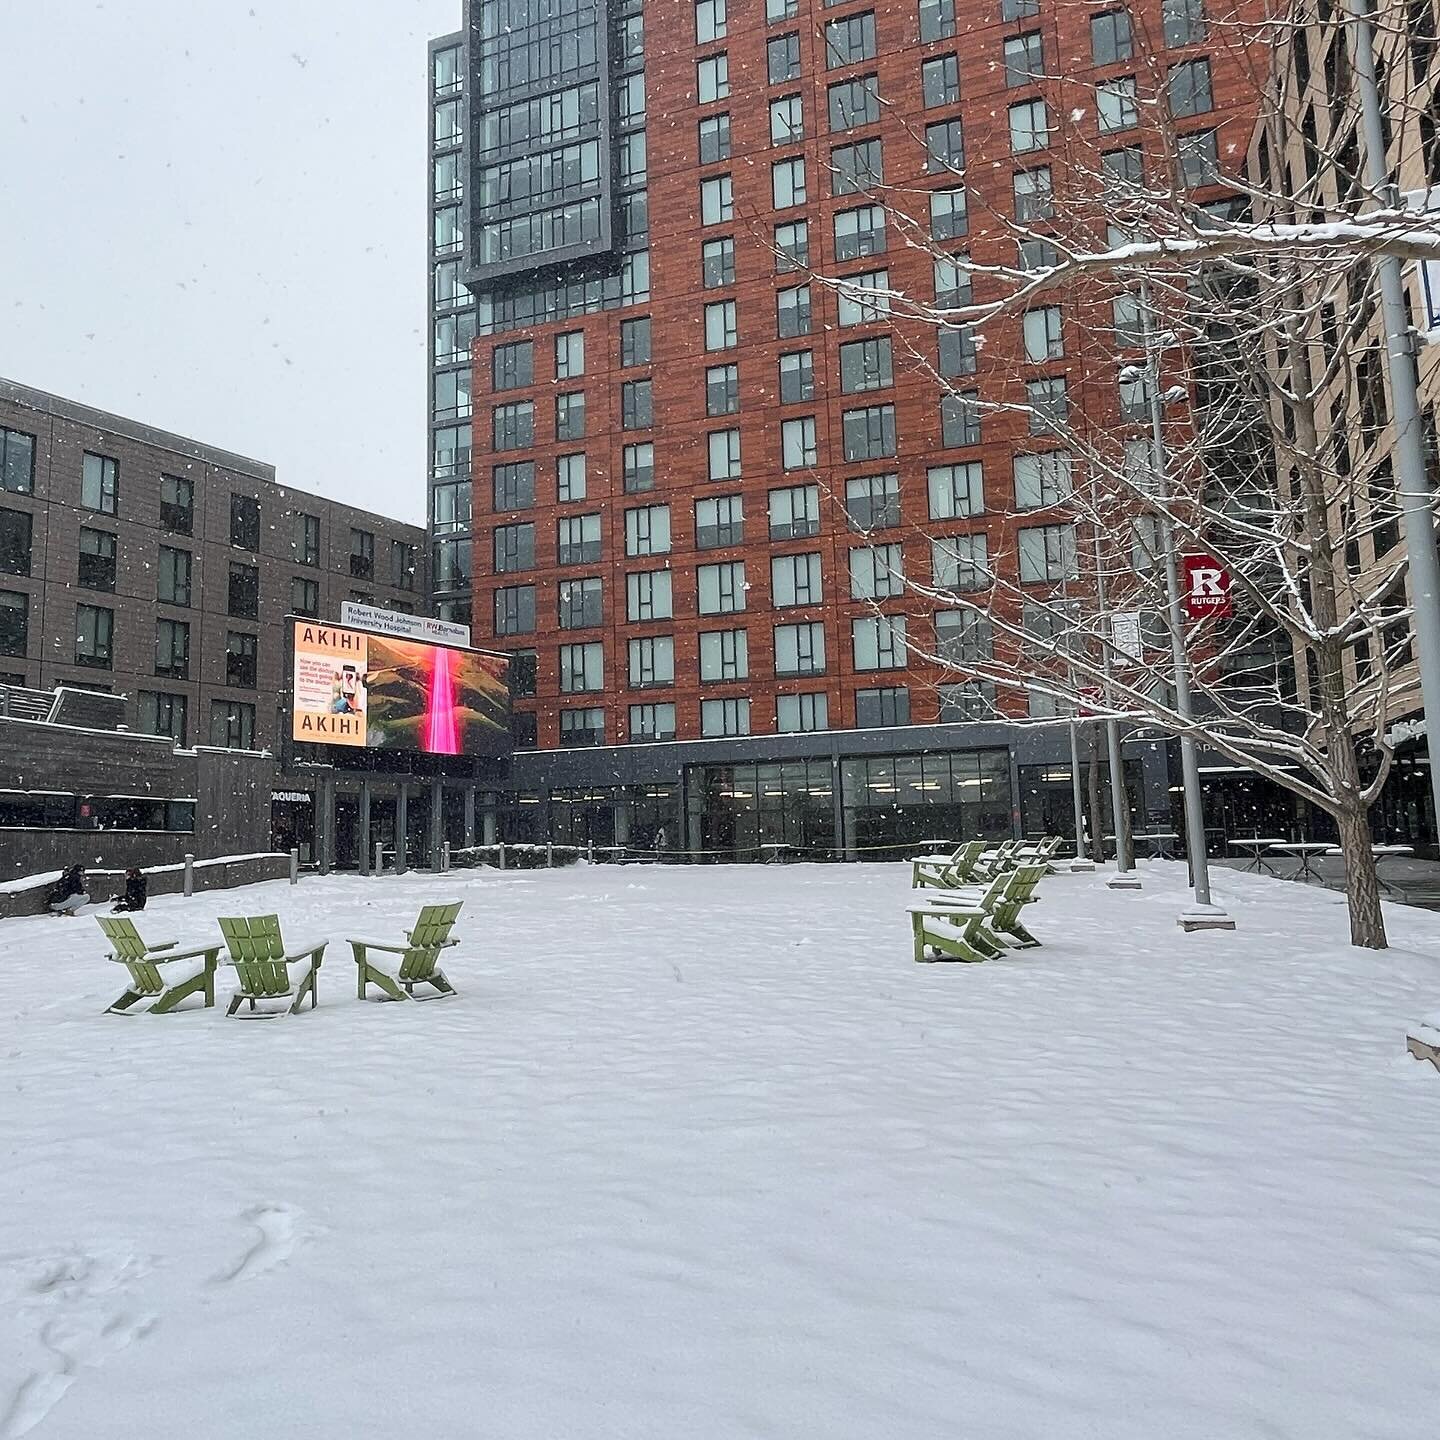 Let it snow, let it snow, let it snow ❄️ All of our restaurants are open! Pizza, fat sandwiches, stir fry, subs, burritos, bubble tea and coffee&hellip;we got you covered today!